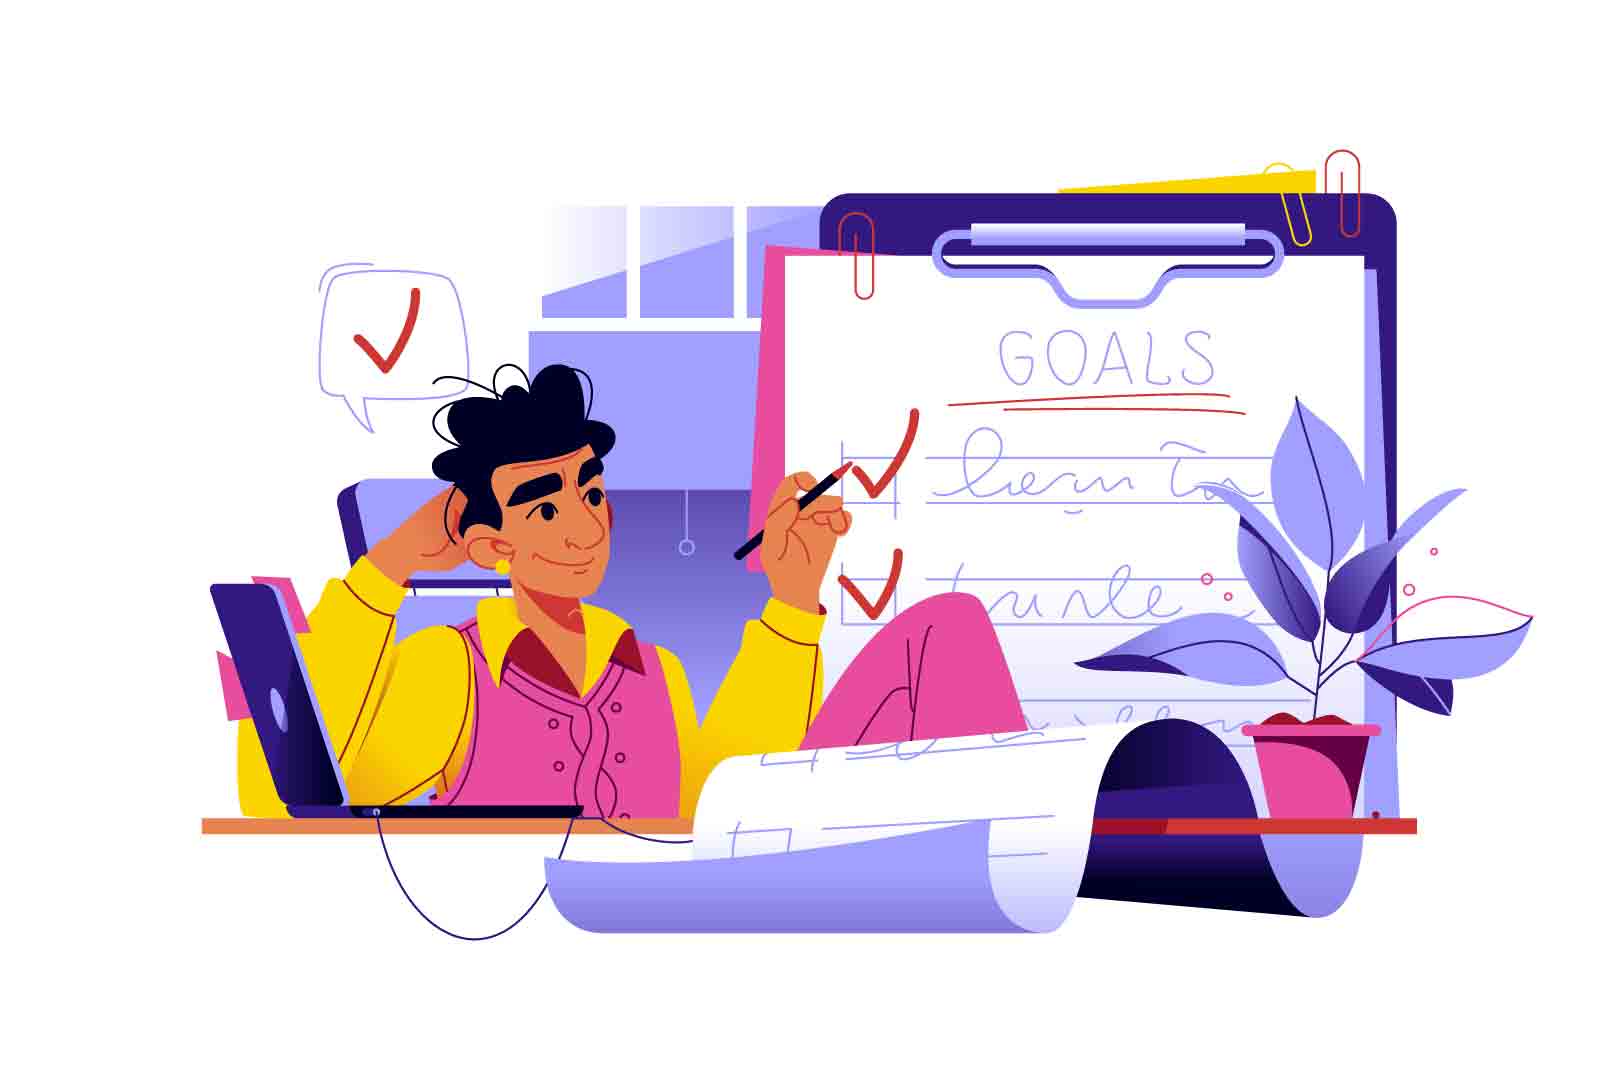 Strategic planning and goal setting vector illustration. Guy checking goals achieved. Mission to accomplish or challenge. Business success concept